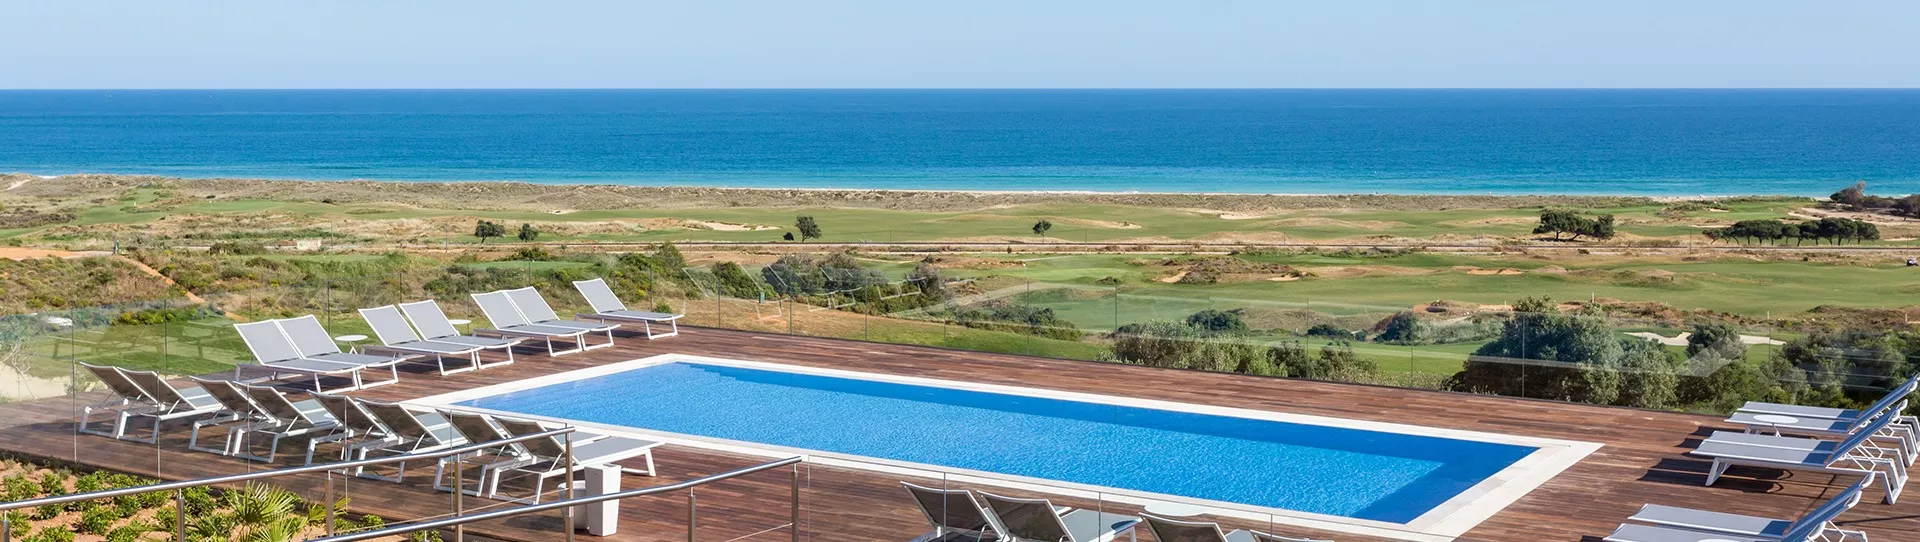 Portugal golf holidays - 4 Nights BB & 3 Golf Rounds - Photo 1